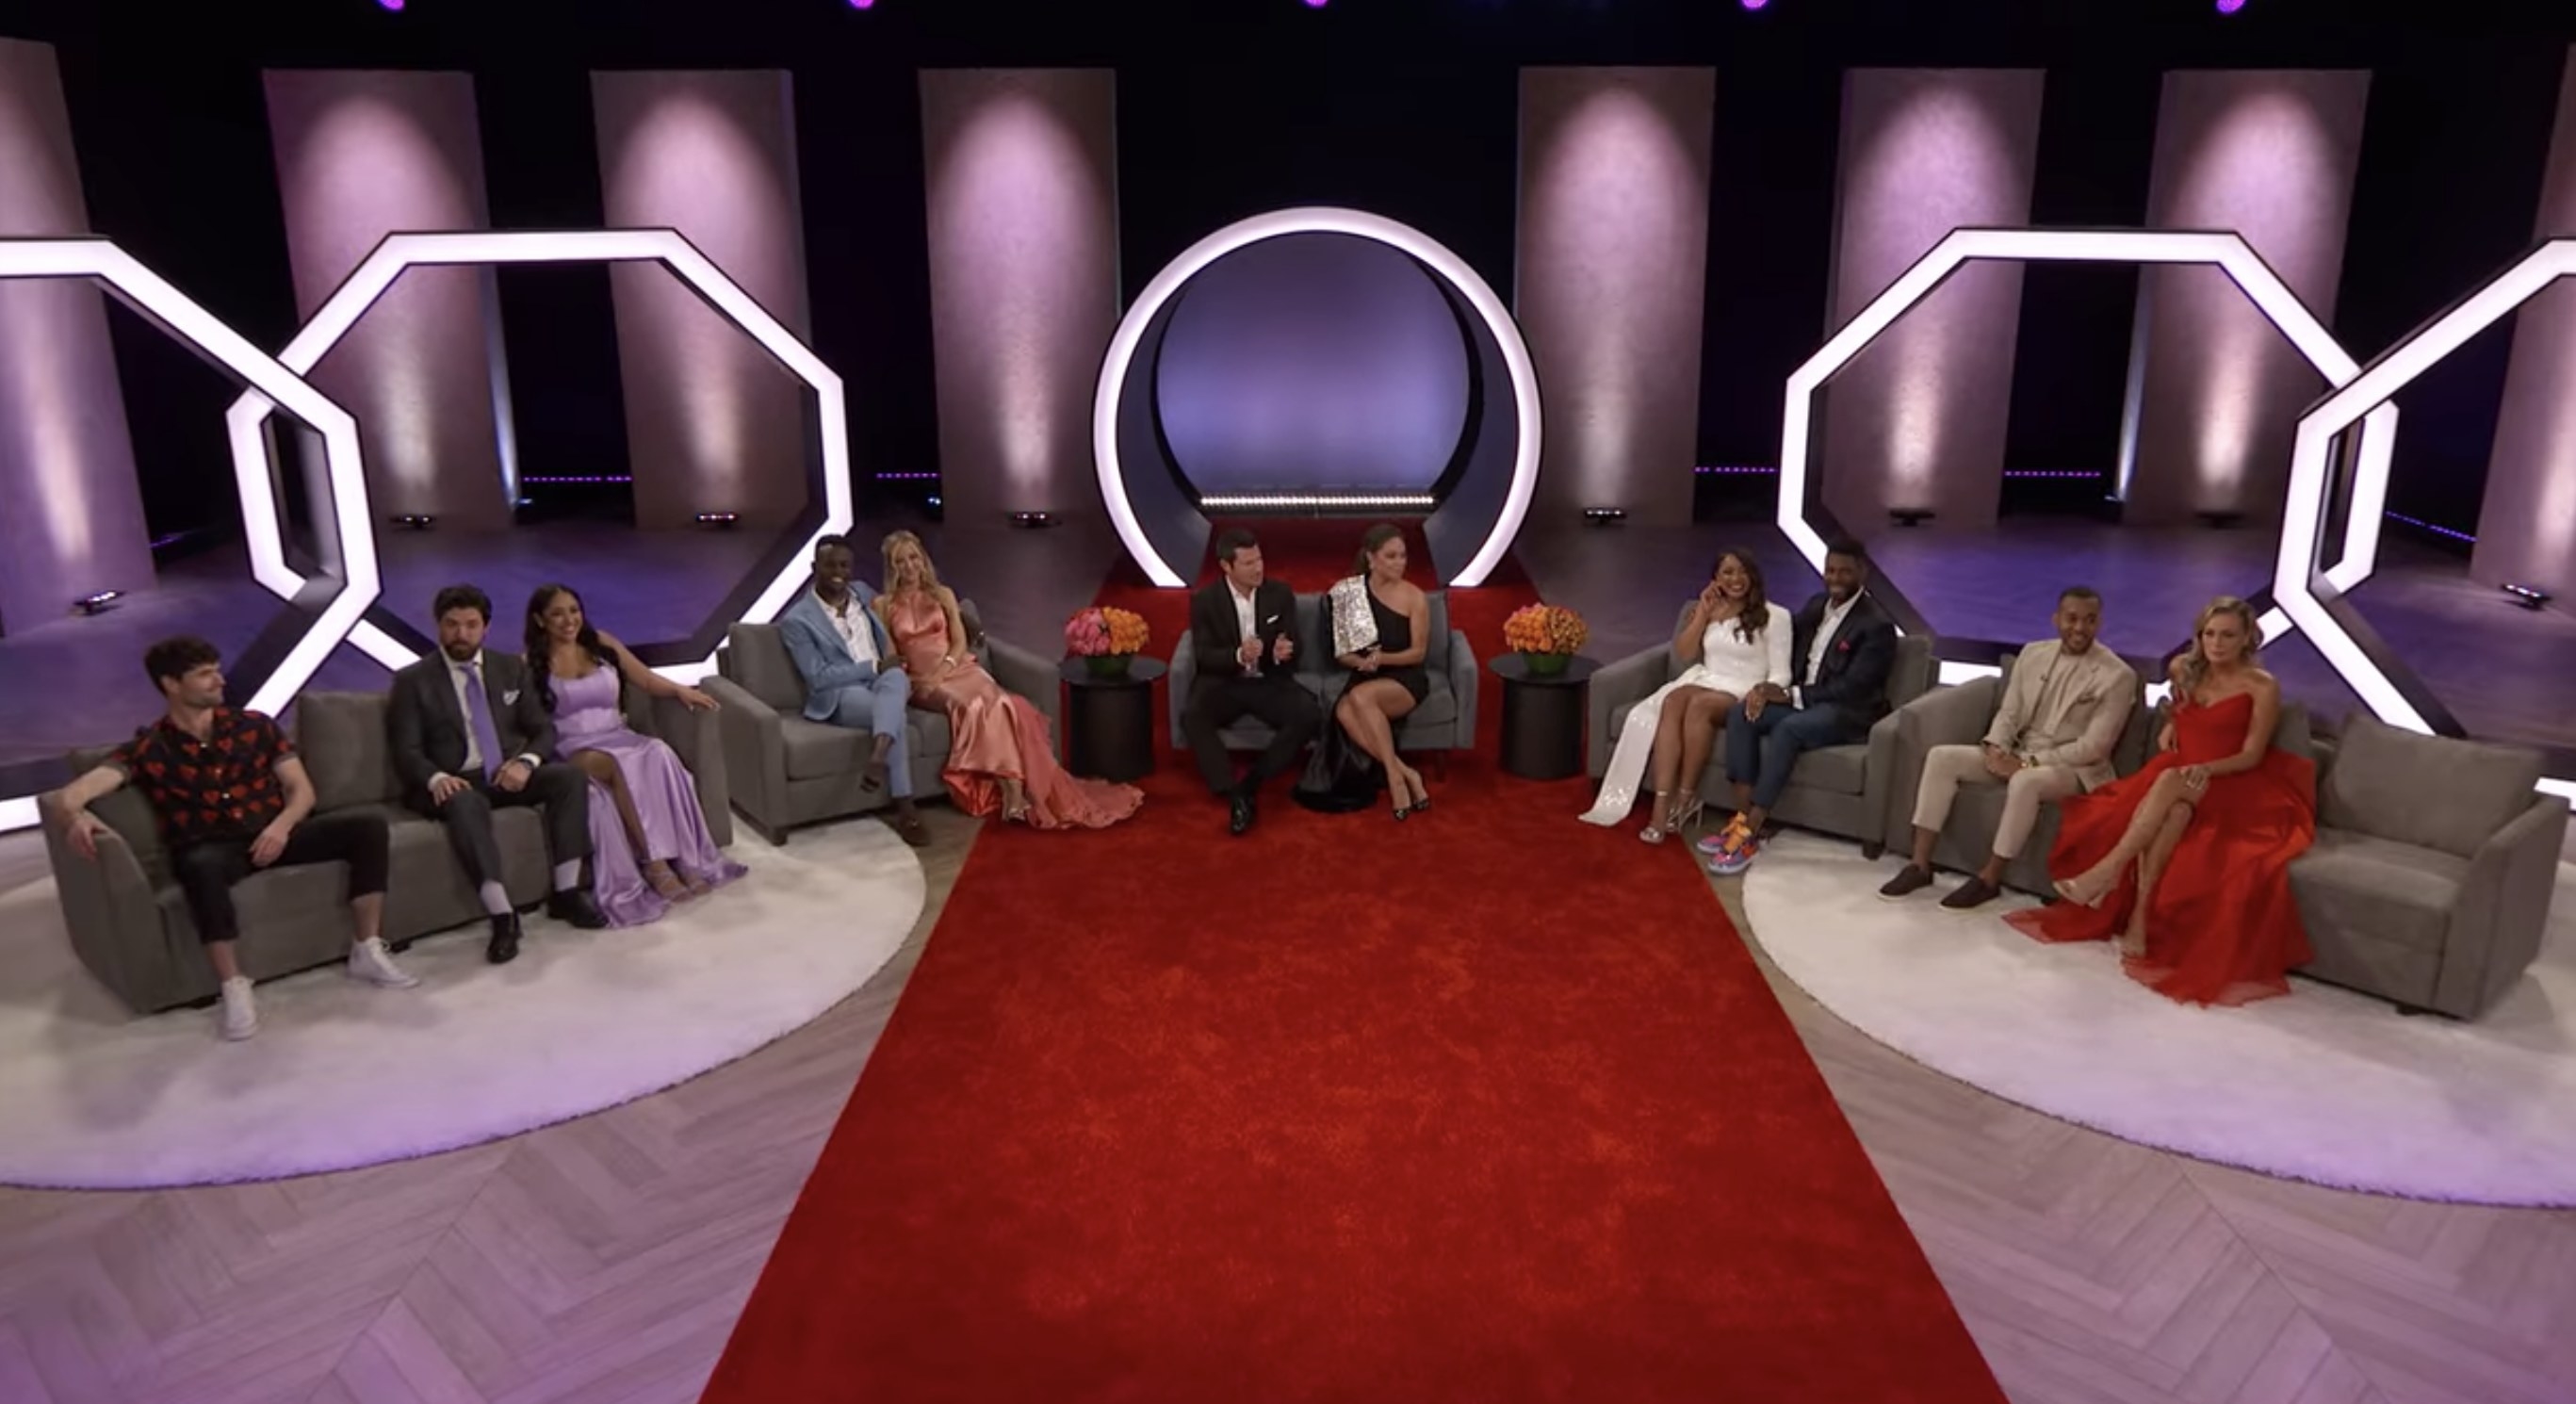 An overview of the cast sitting at the reunion